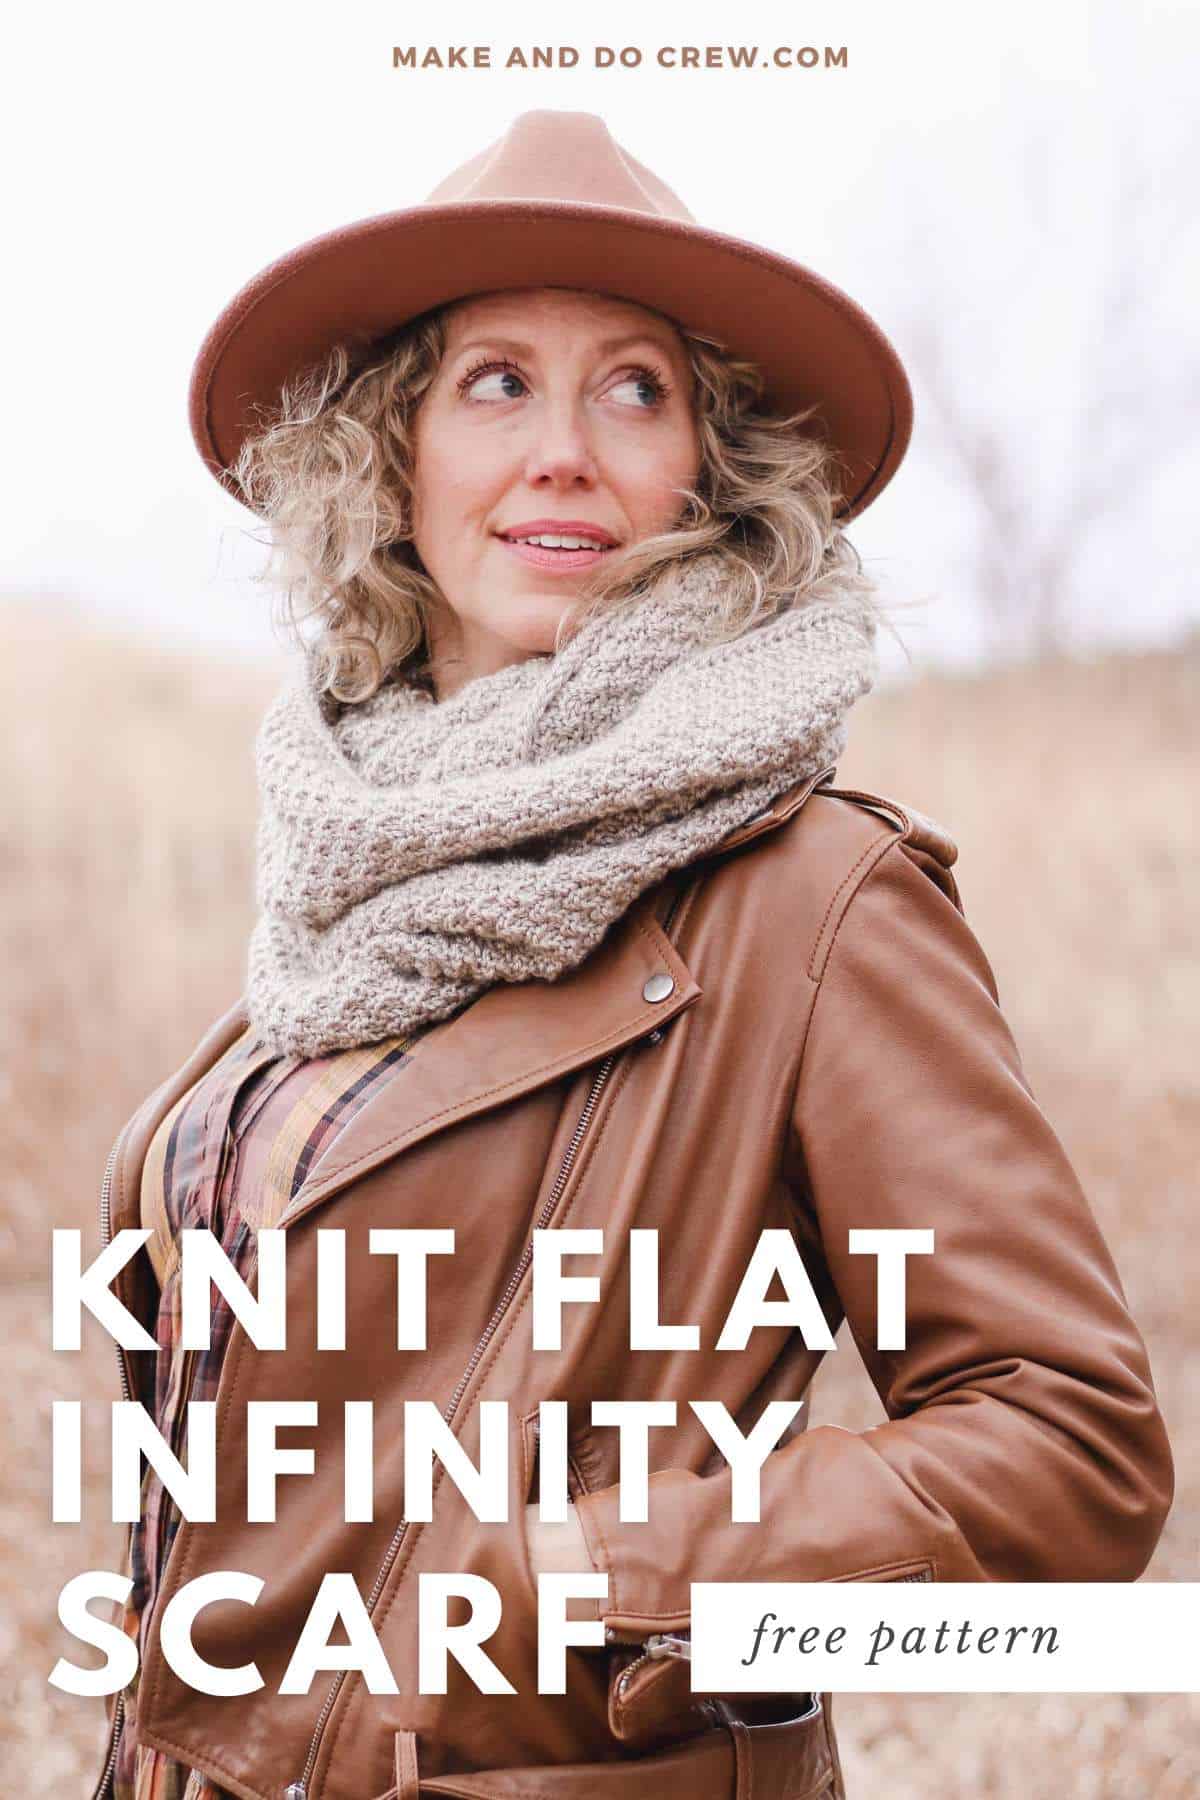 Modern, grey knit infinity scarf worn by a woman looking over her shoulder.